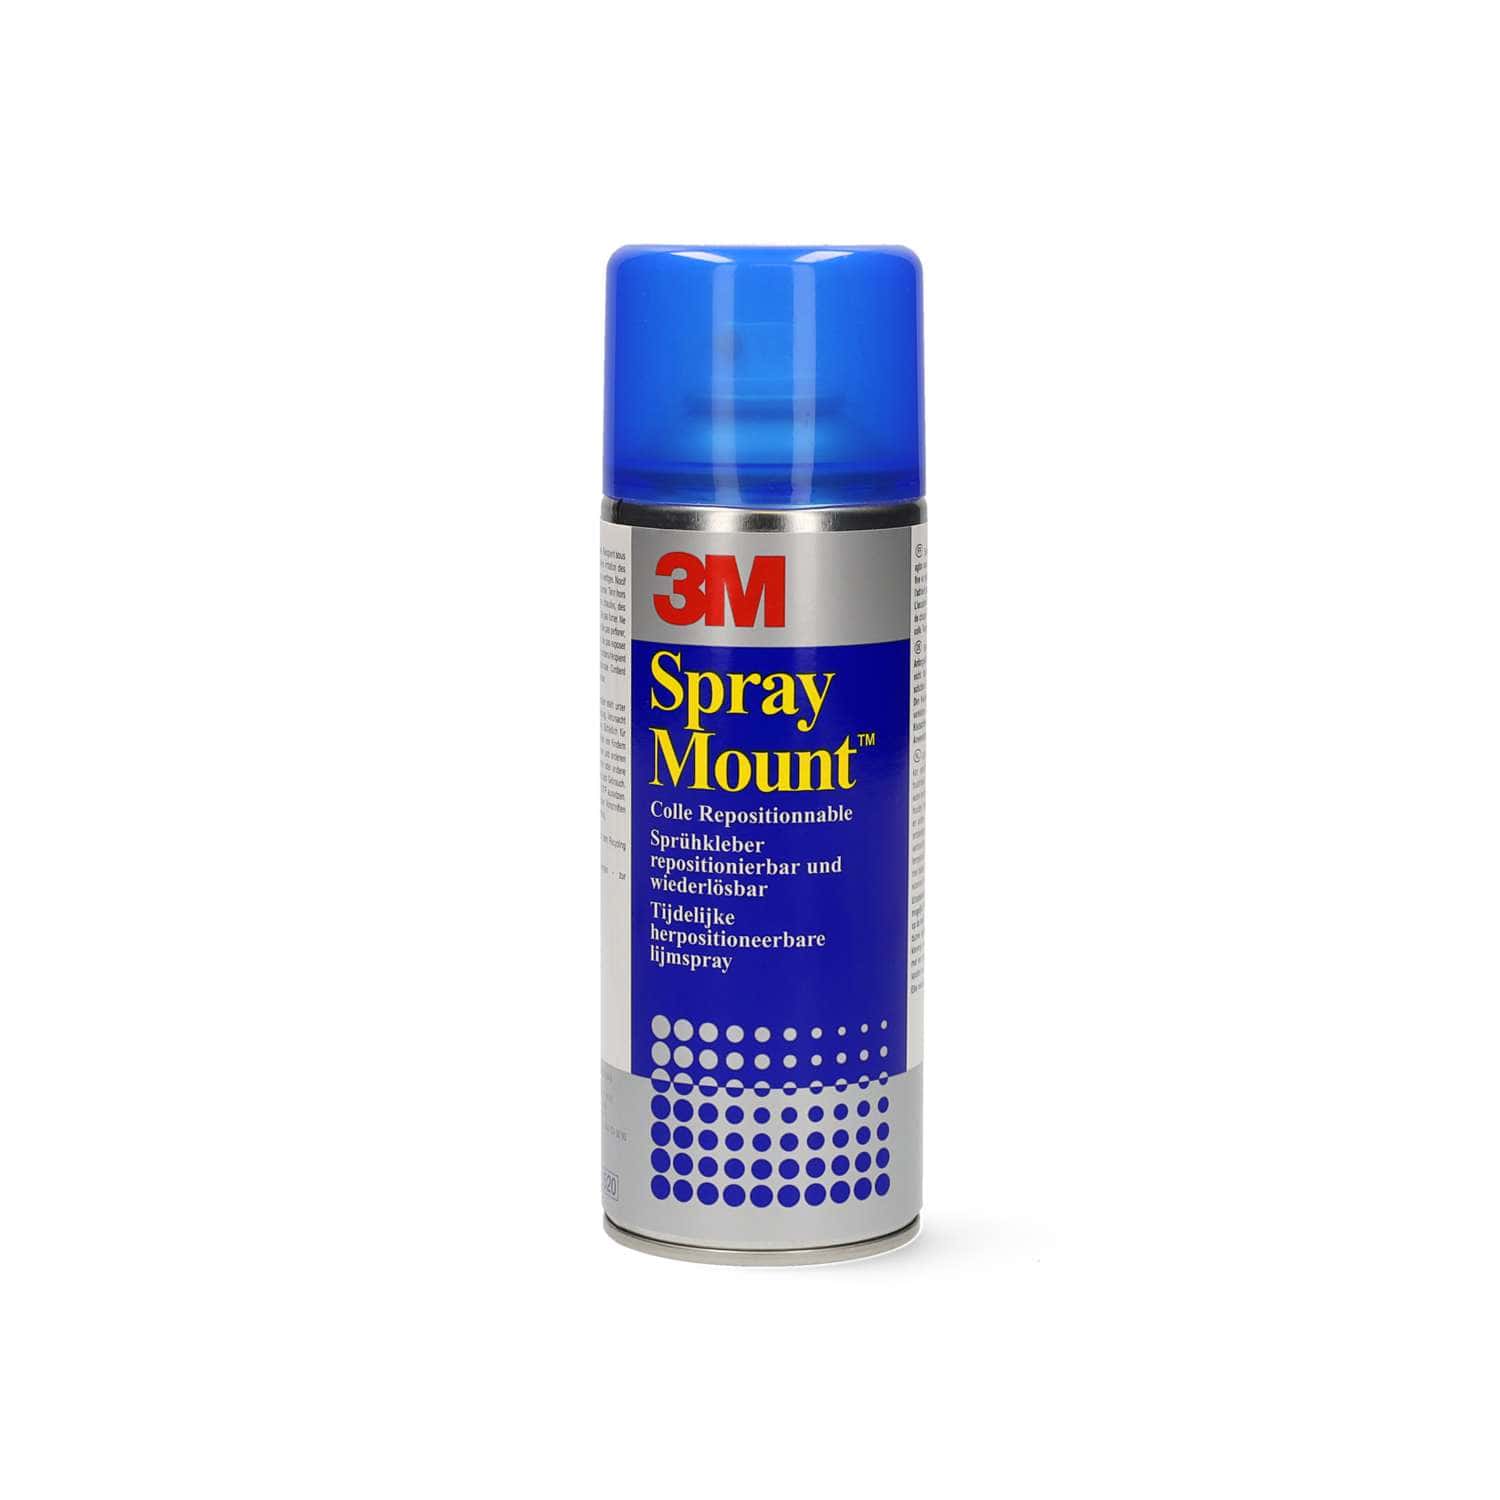 Colle repositionnable Spray Mount 400ml - 3M